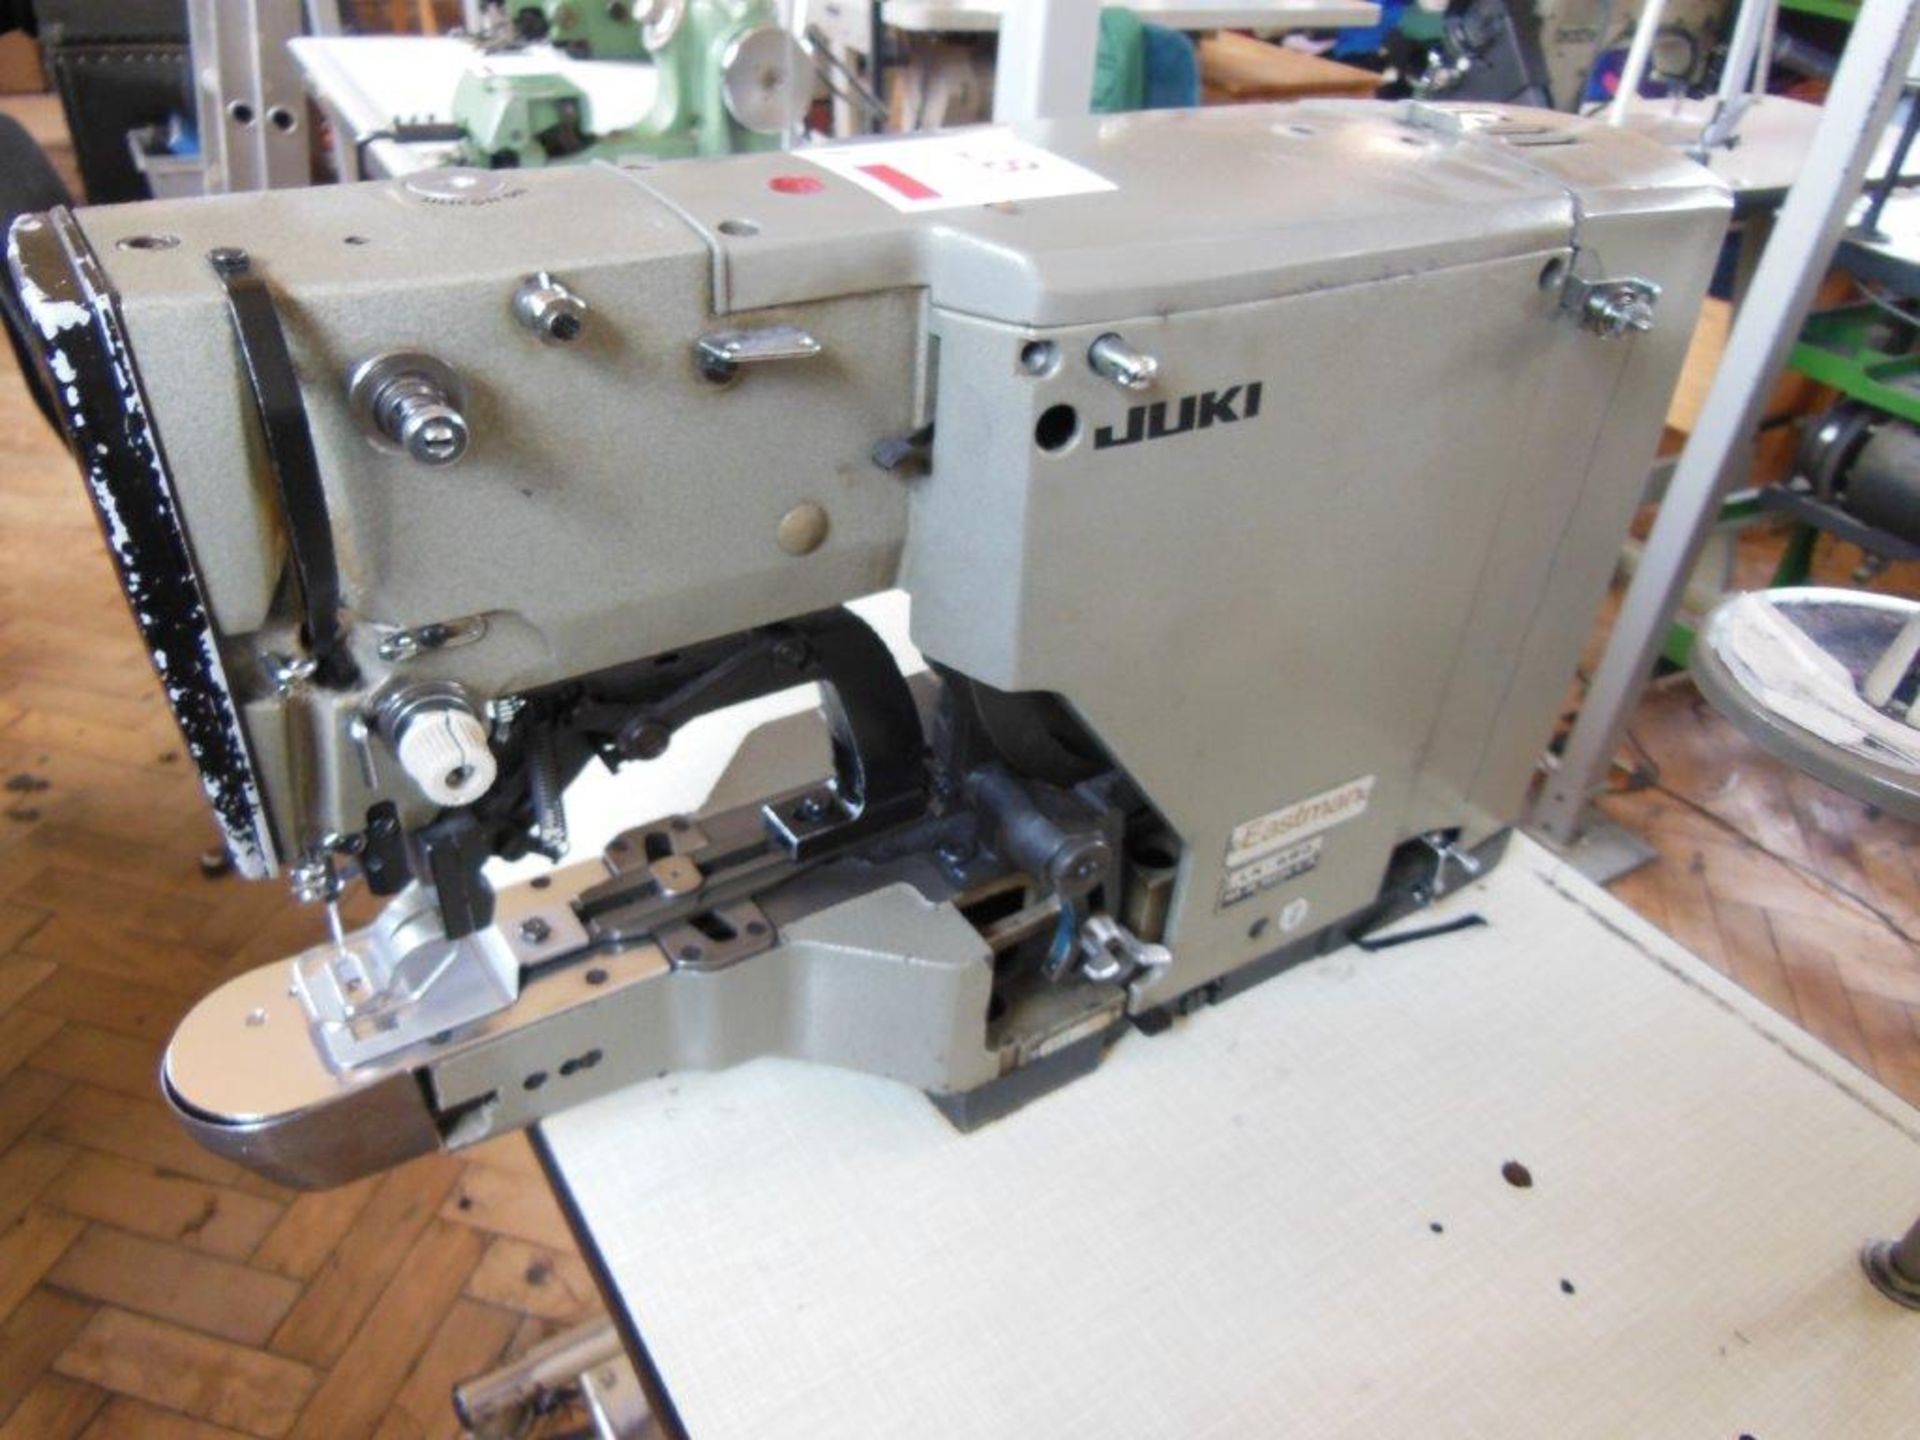 Juki LK-980 bartack industrial sewing machine, single phase. NB: this item has no CE marking. The - Image 3 of 5